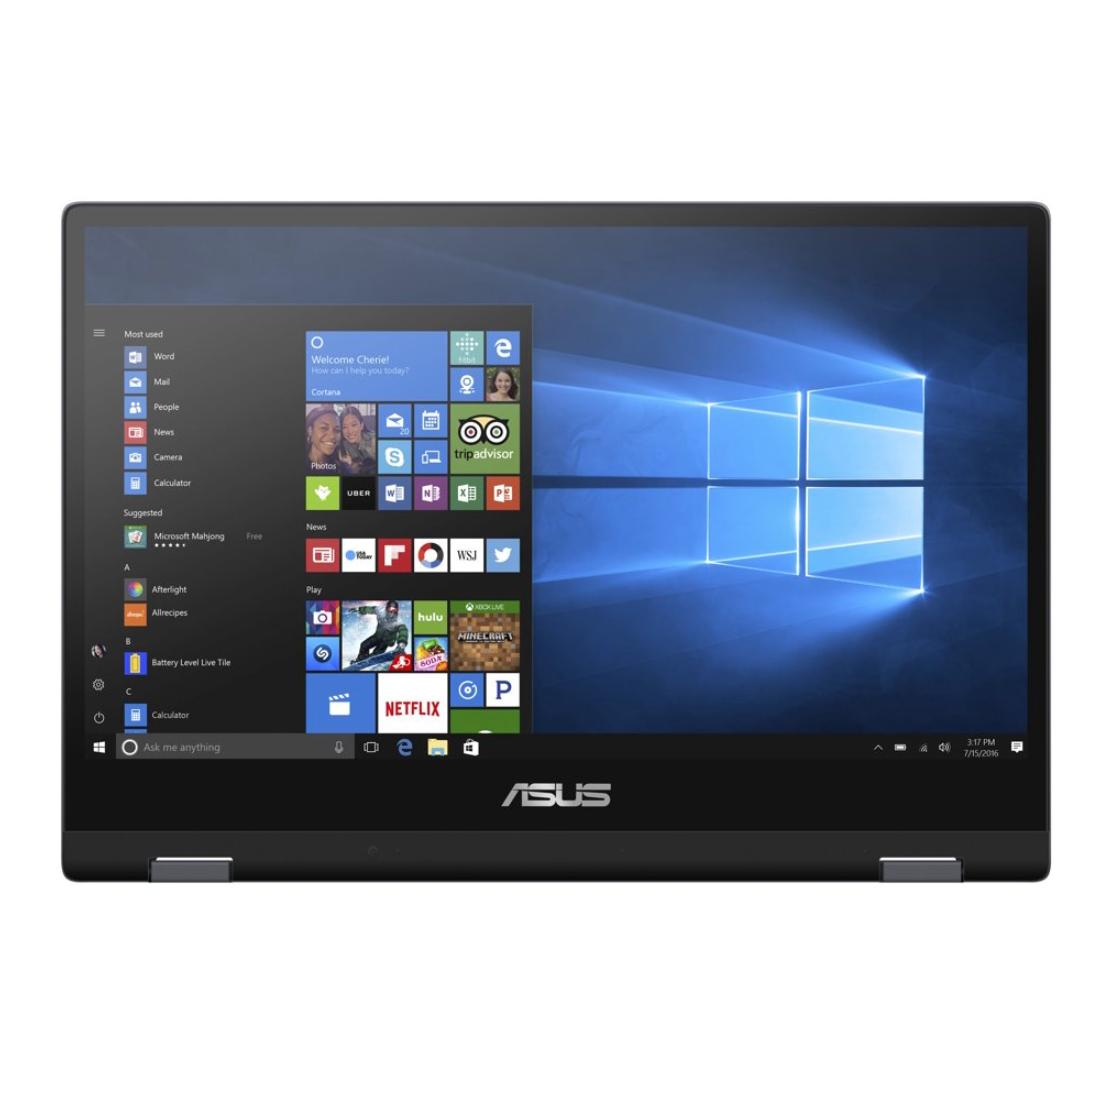 Notebook Asus Vivobook Go 14 Dualcore 2.8Ghz, 4GB, 128GB SSD, 14 FHD 